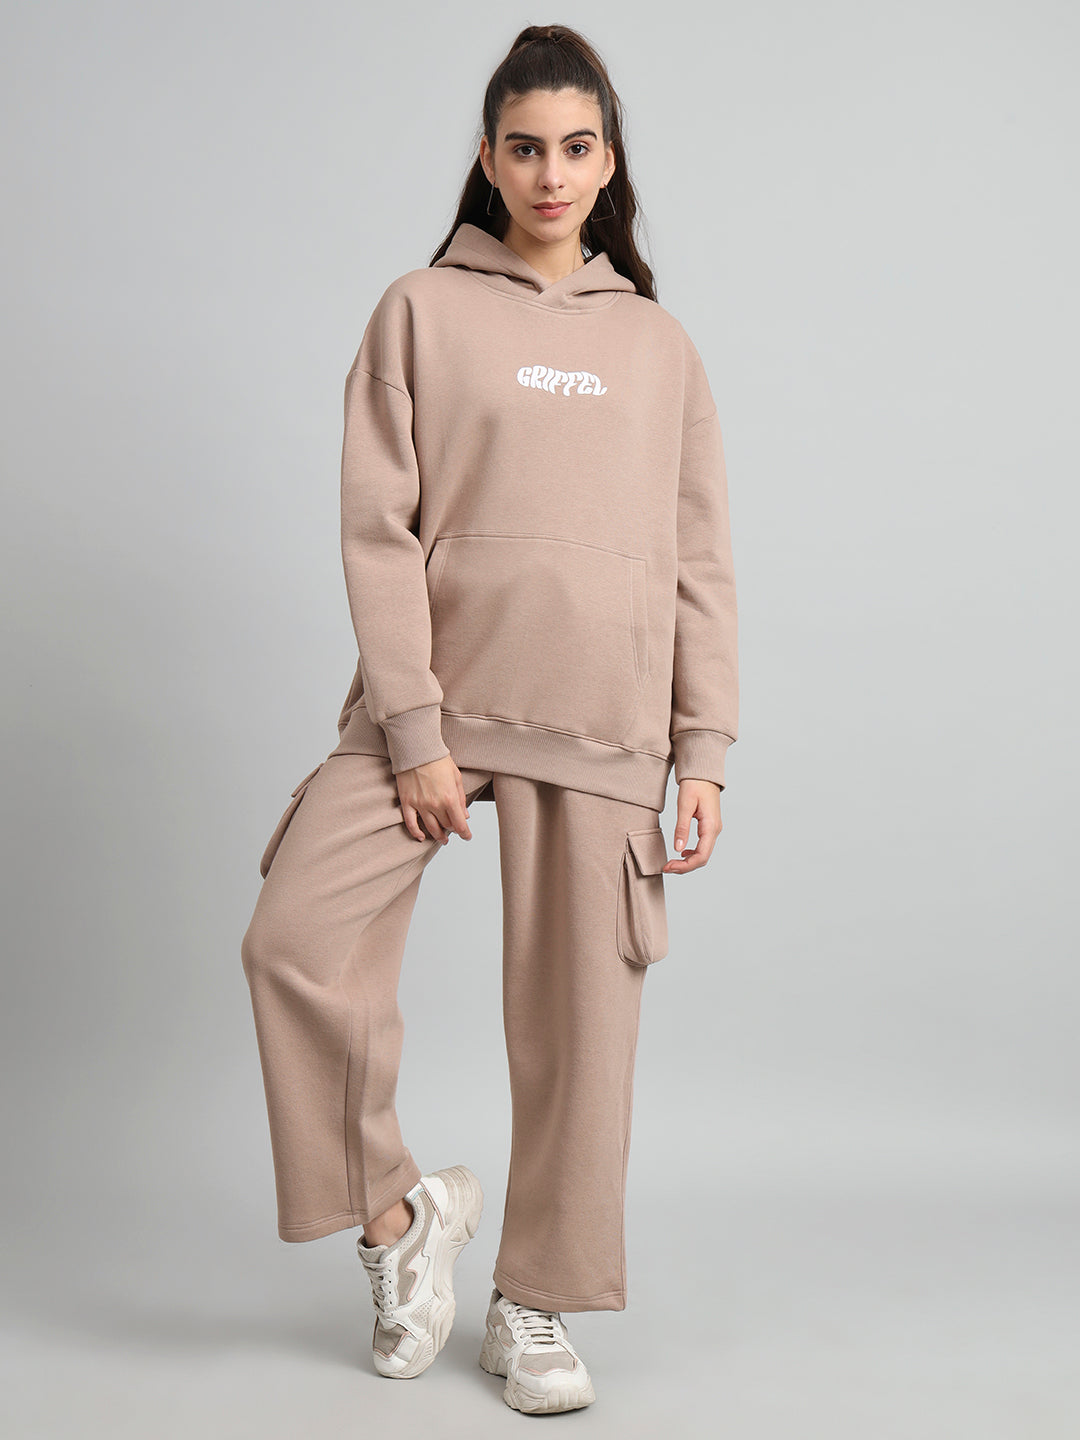 Griffel Women Oversized Fit Absent Minded Print 100% Cotton Camel Fleece Hoodie and trackpant